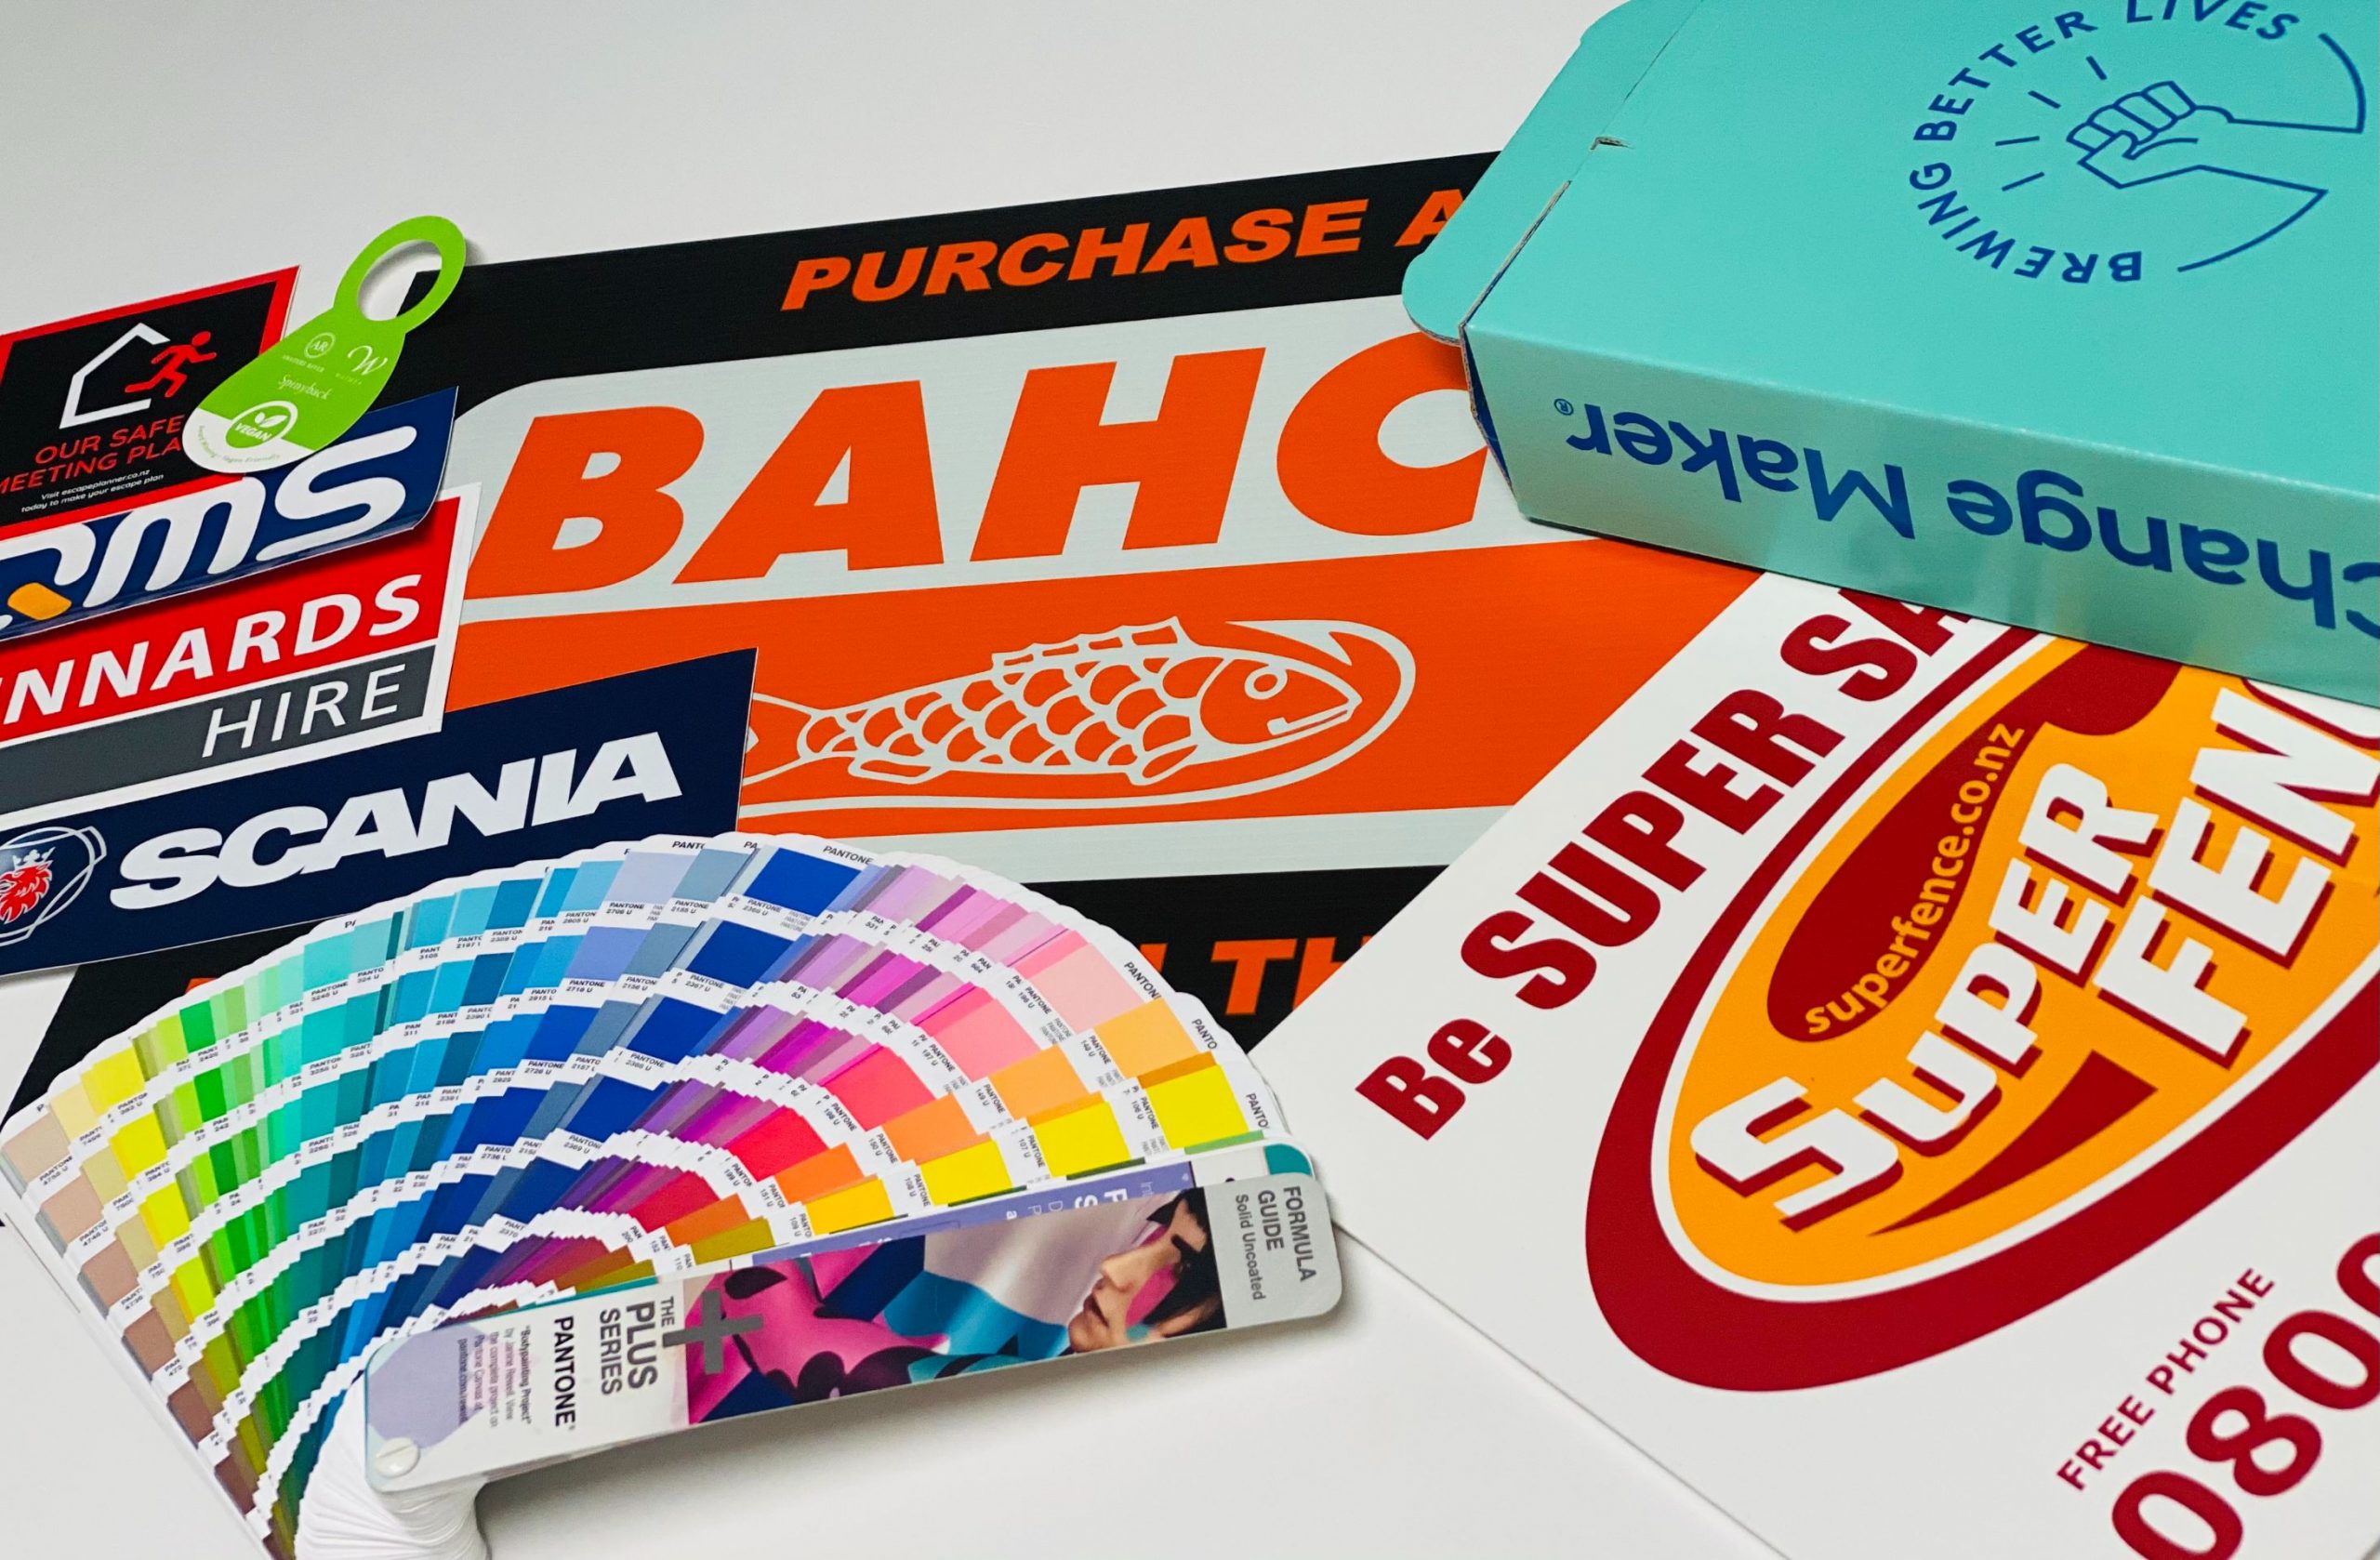 Some products like colour books that were screen printed in Auckland by Southan Print